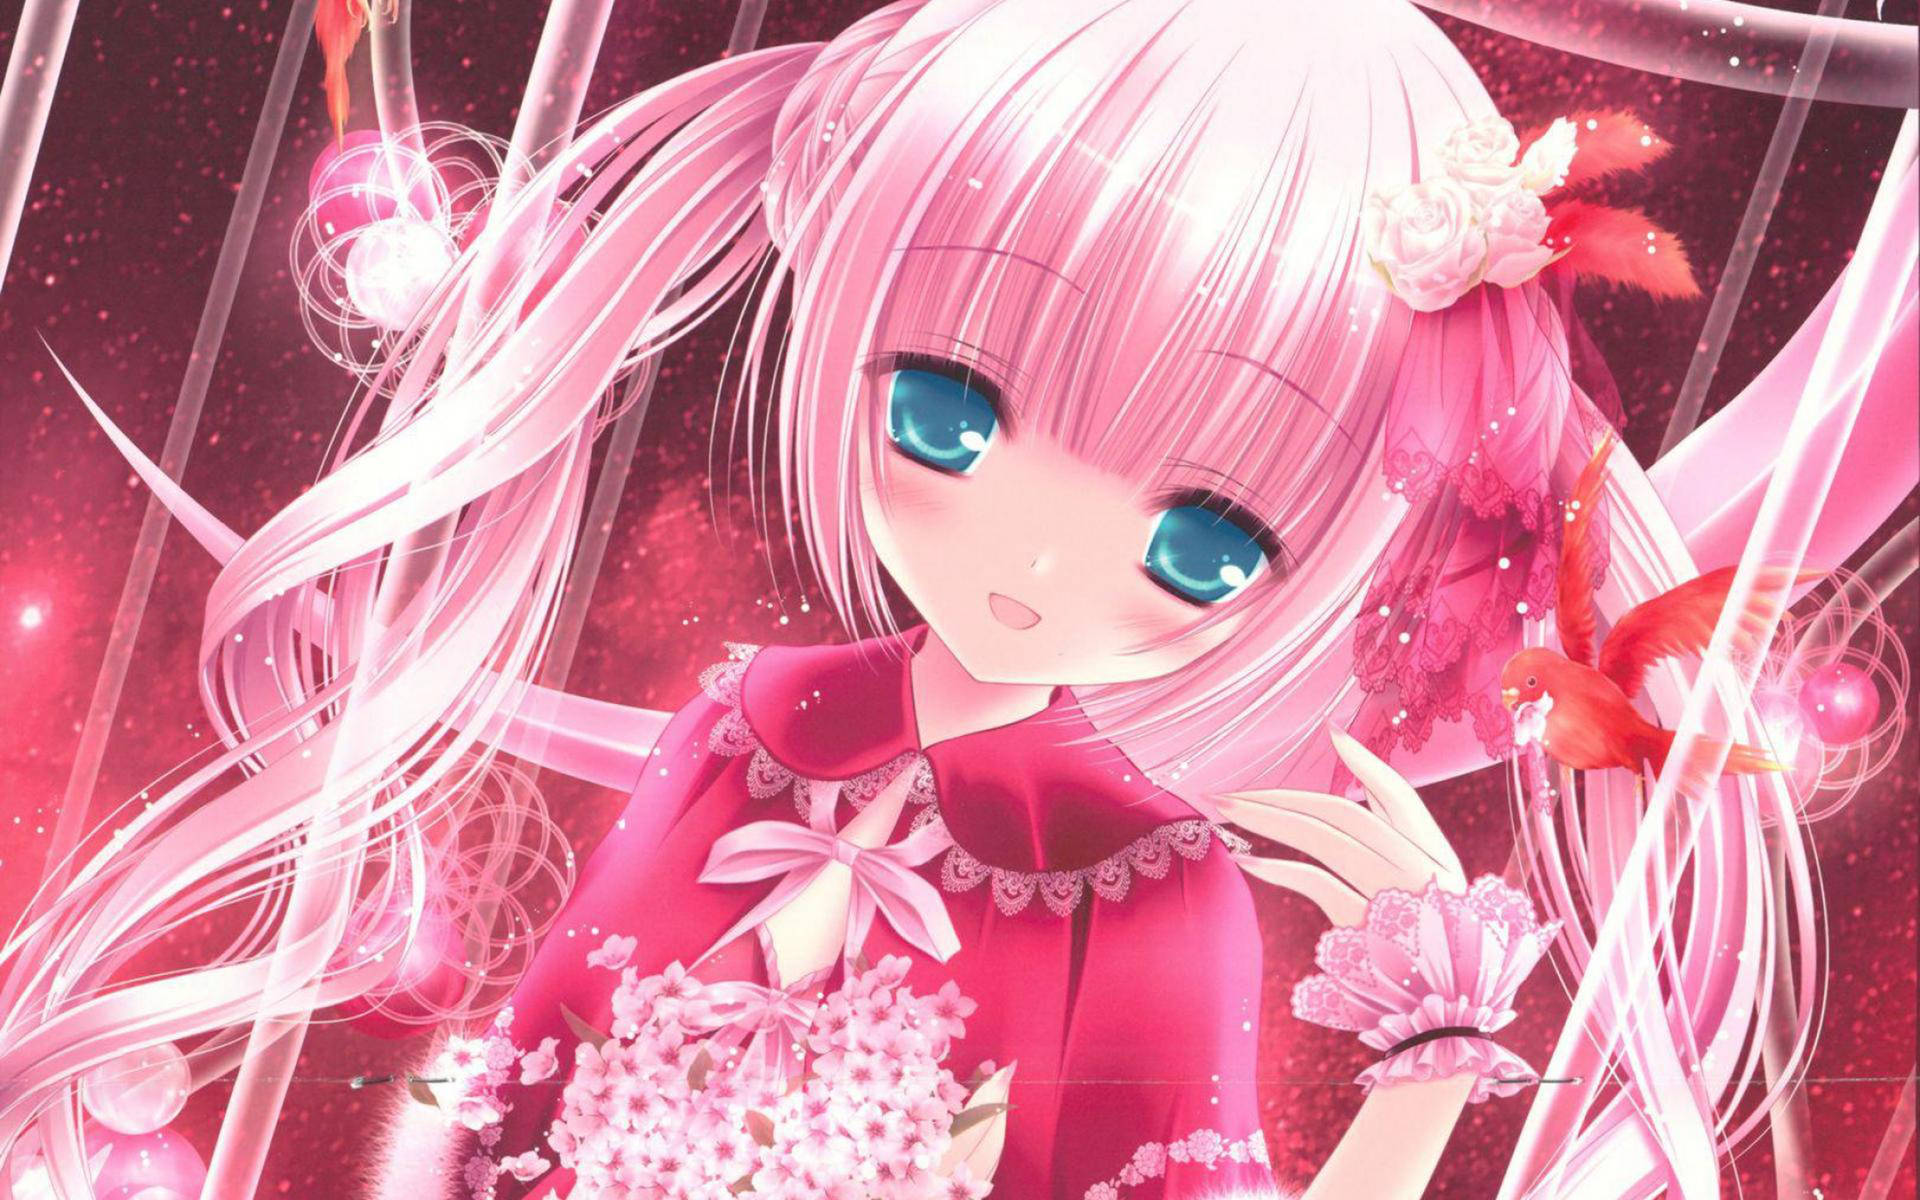 Free Pink Anime Aesthetic Wallpaper Downloads, [100+] Pink Anime Aesthetic  Wallpapers for FREE 